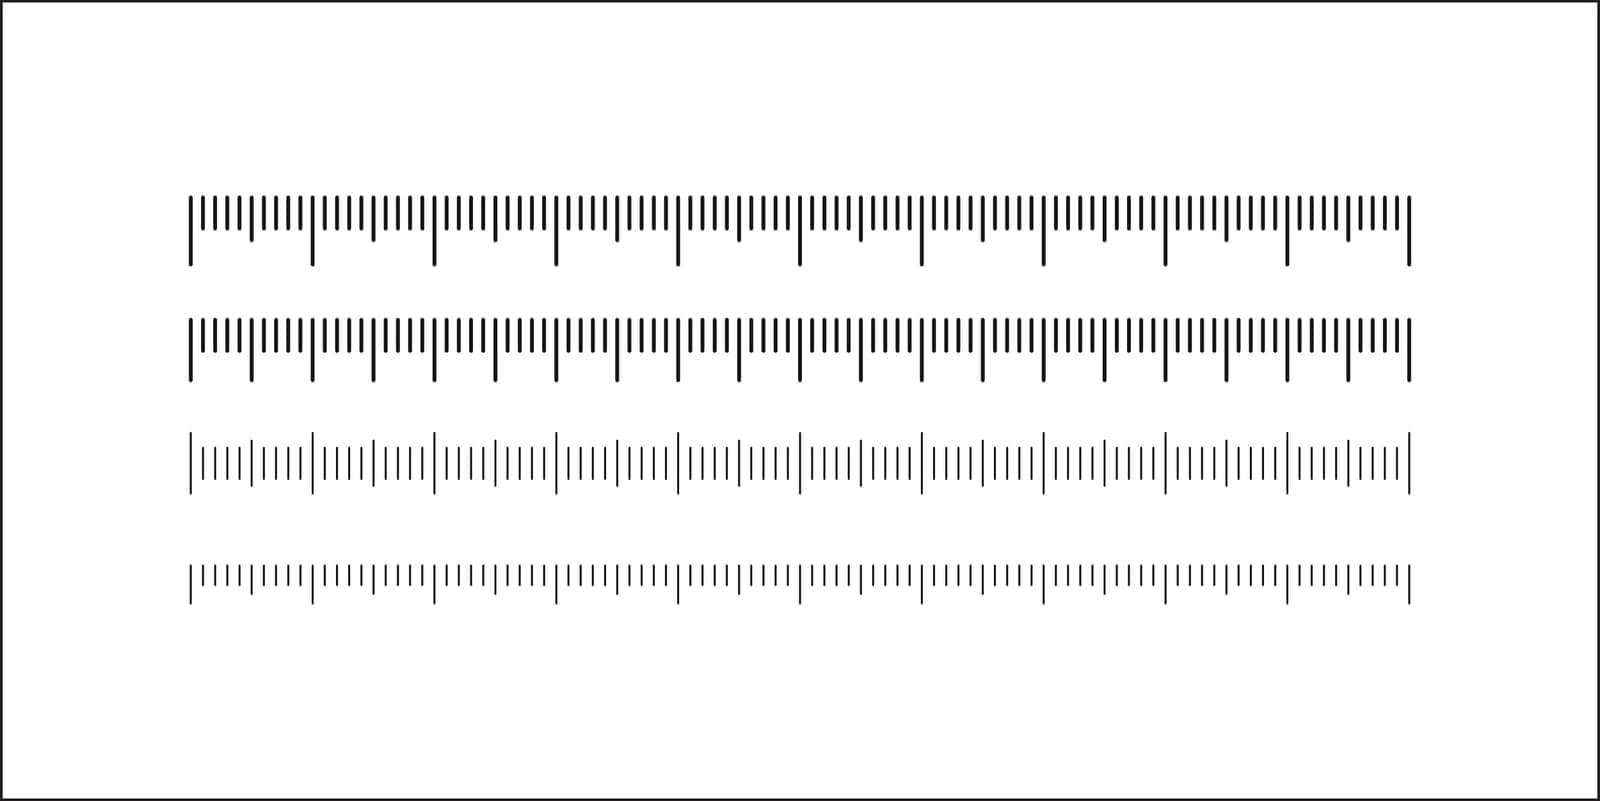 Ruler scale measure or vector length measurement scale chart. 10 EPS